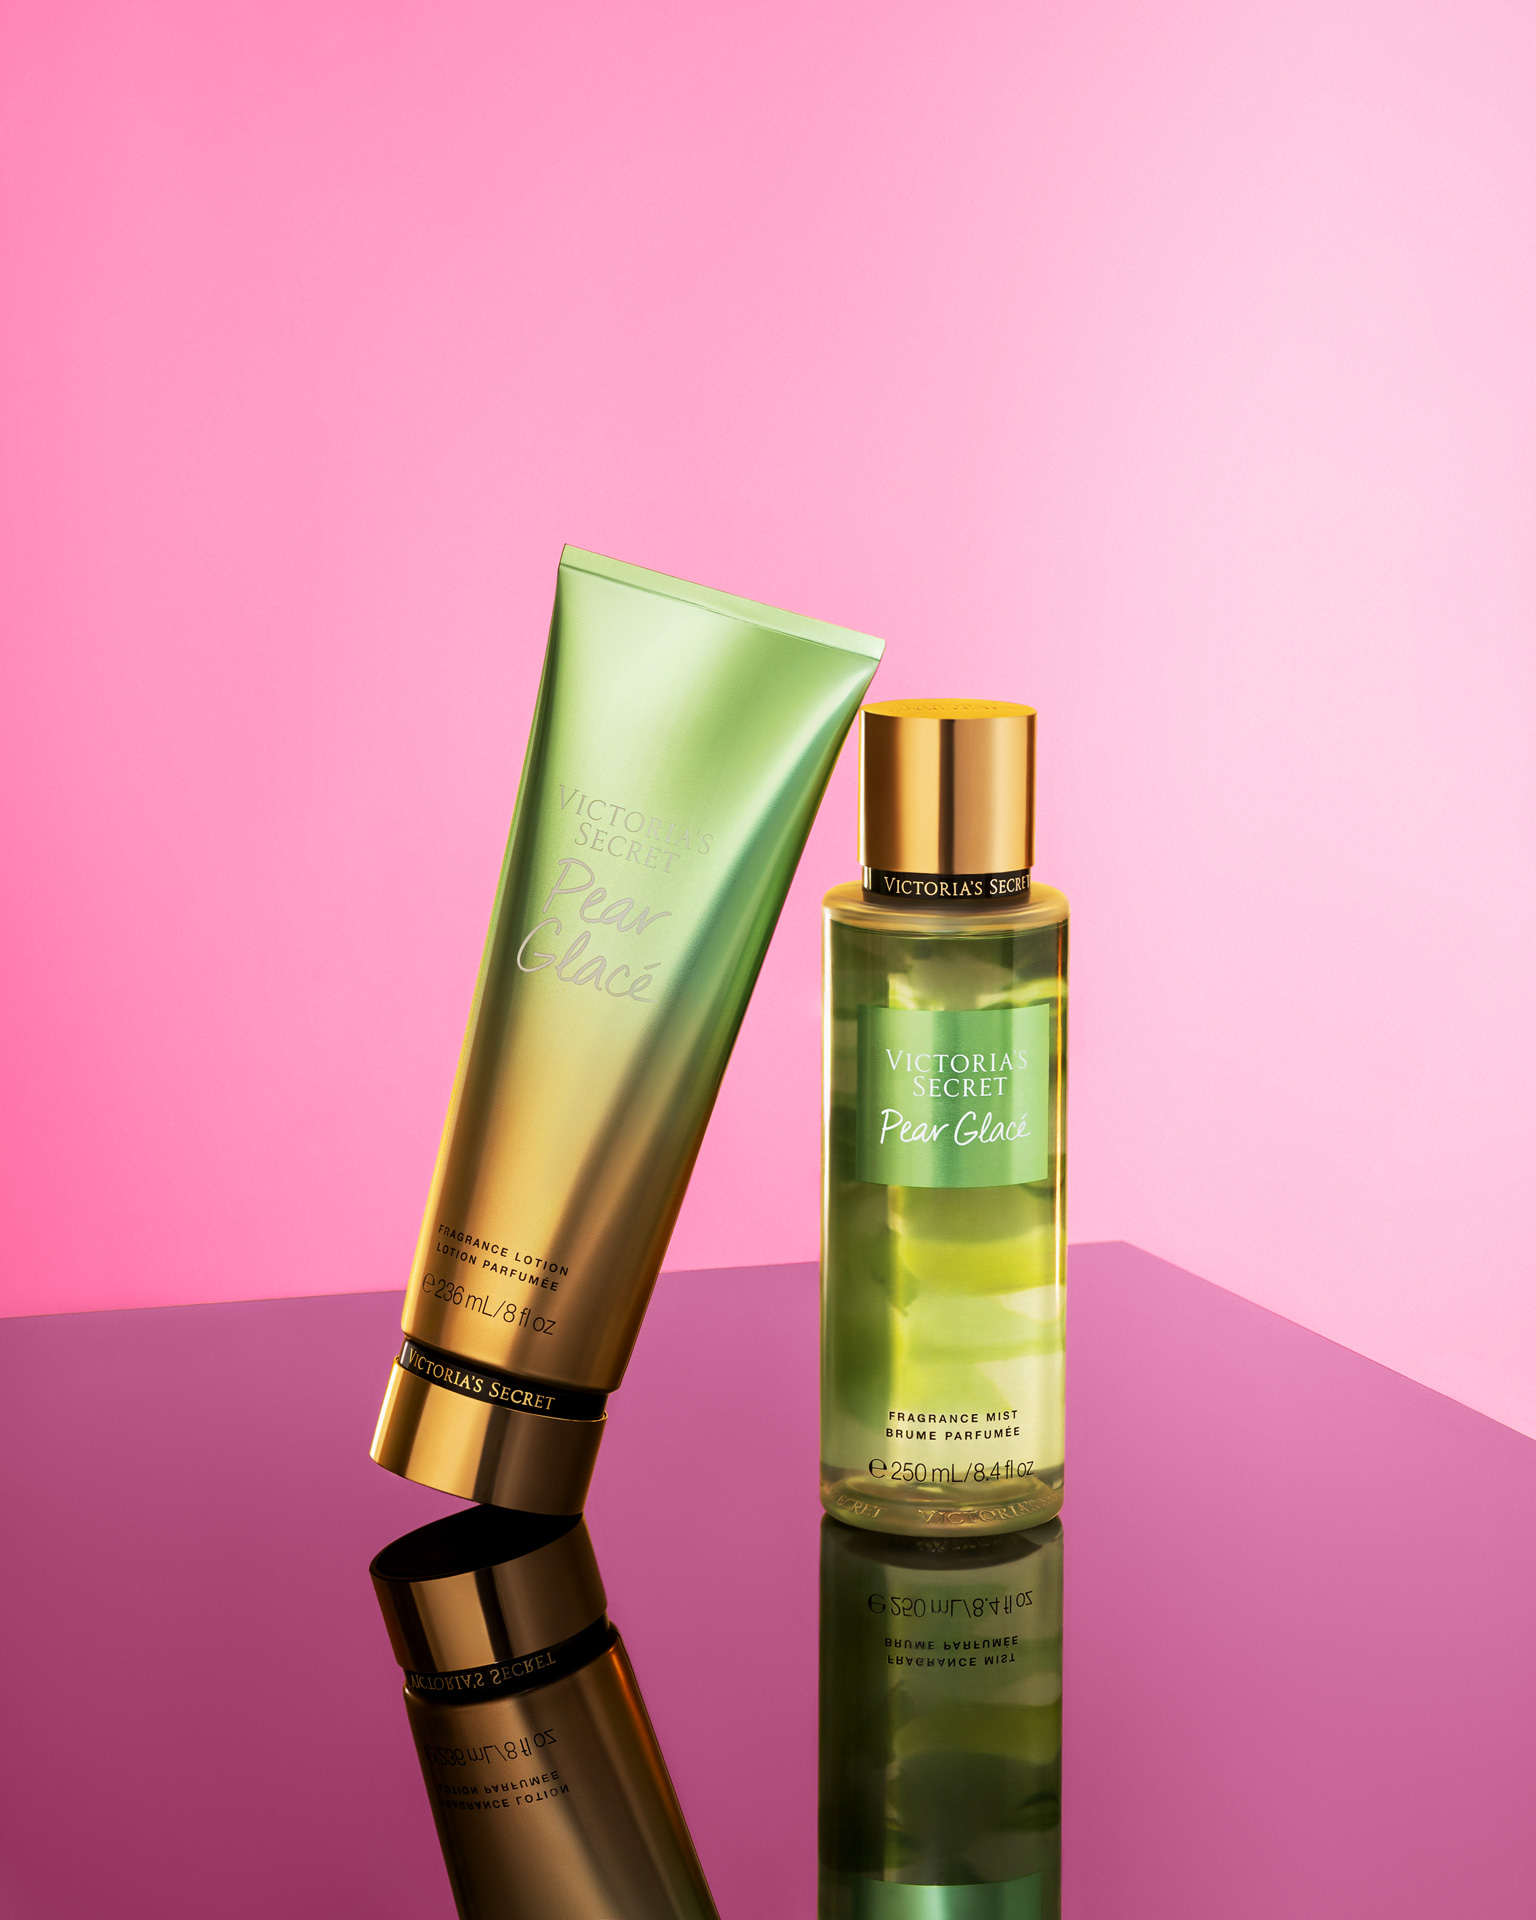 Advertising product photography for Victoria Secret brand